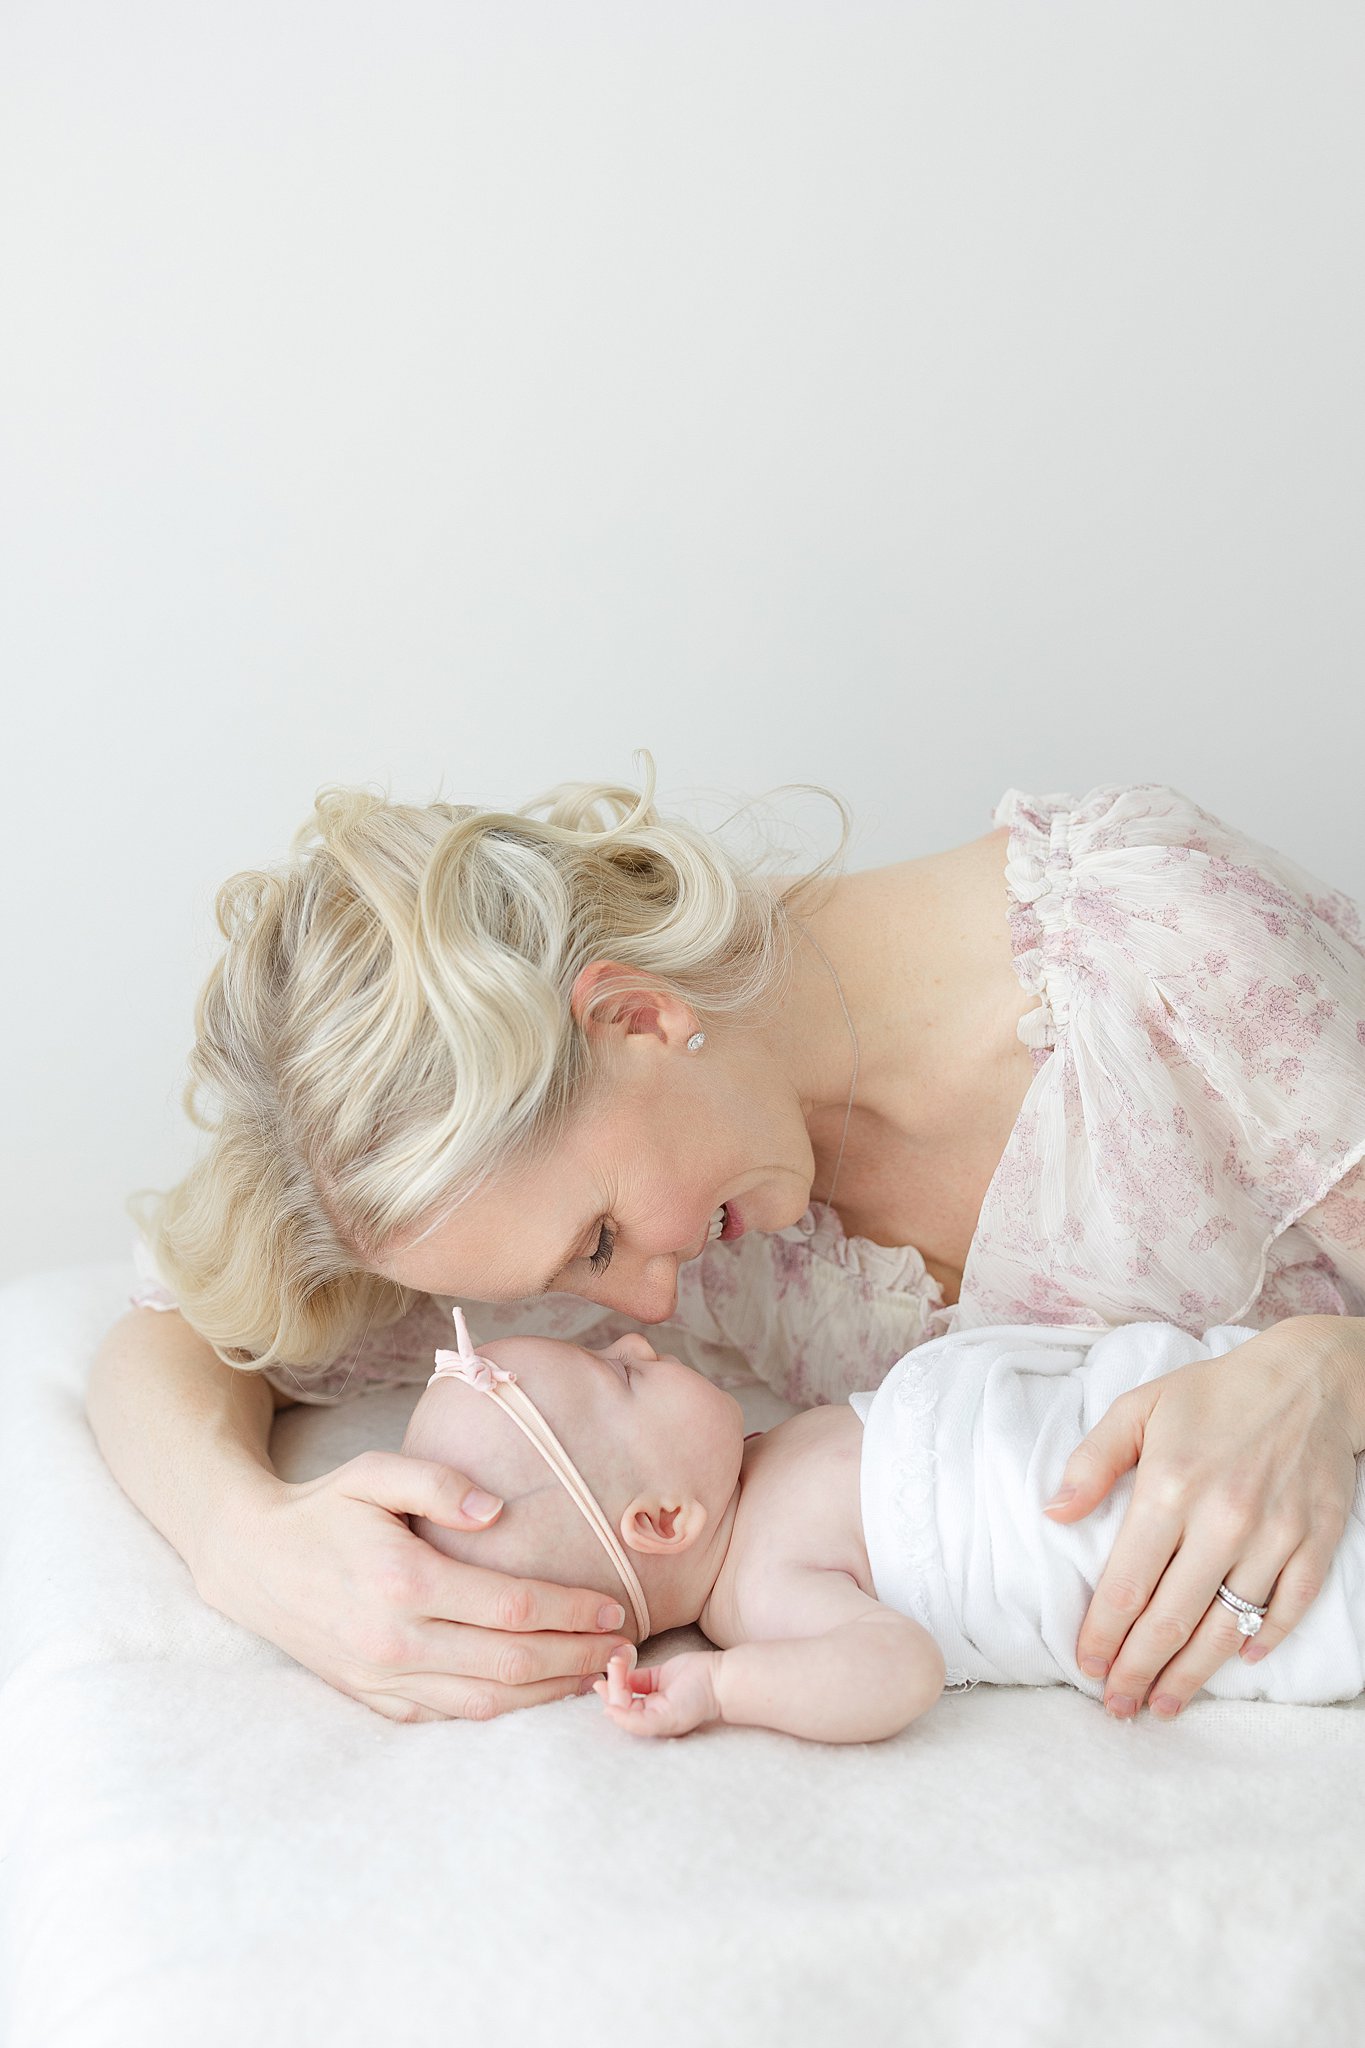 A happy mom laughs while snuggling with her sleeping newborn baby on a white bed in a pink dress after meeting lactation consultants in indianapolis